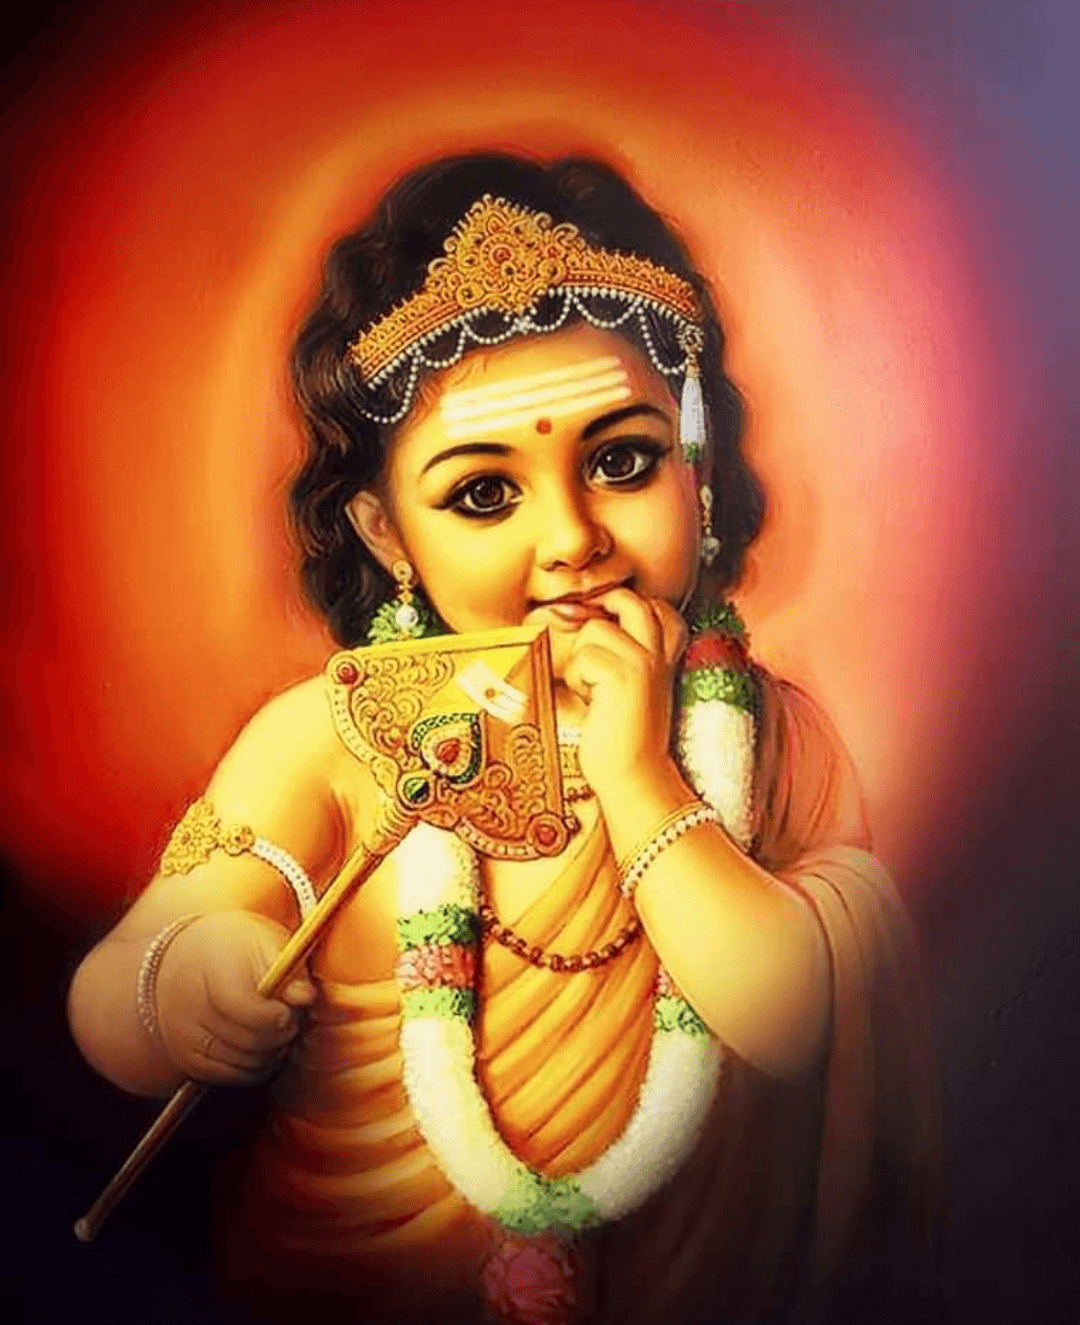 Download A Young Lord Krishna In A Golden Dress | Wallpapers.com